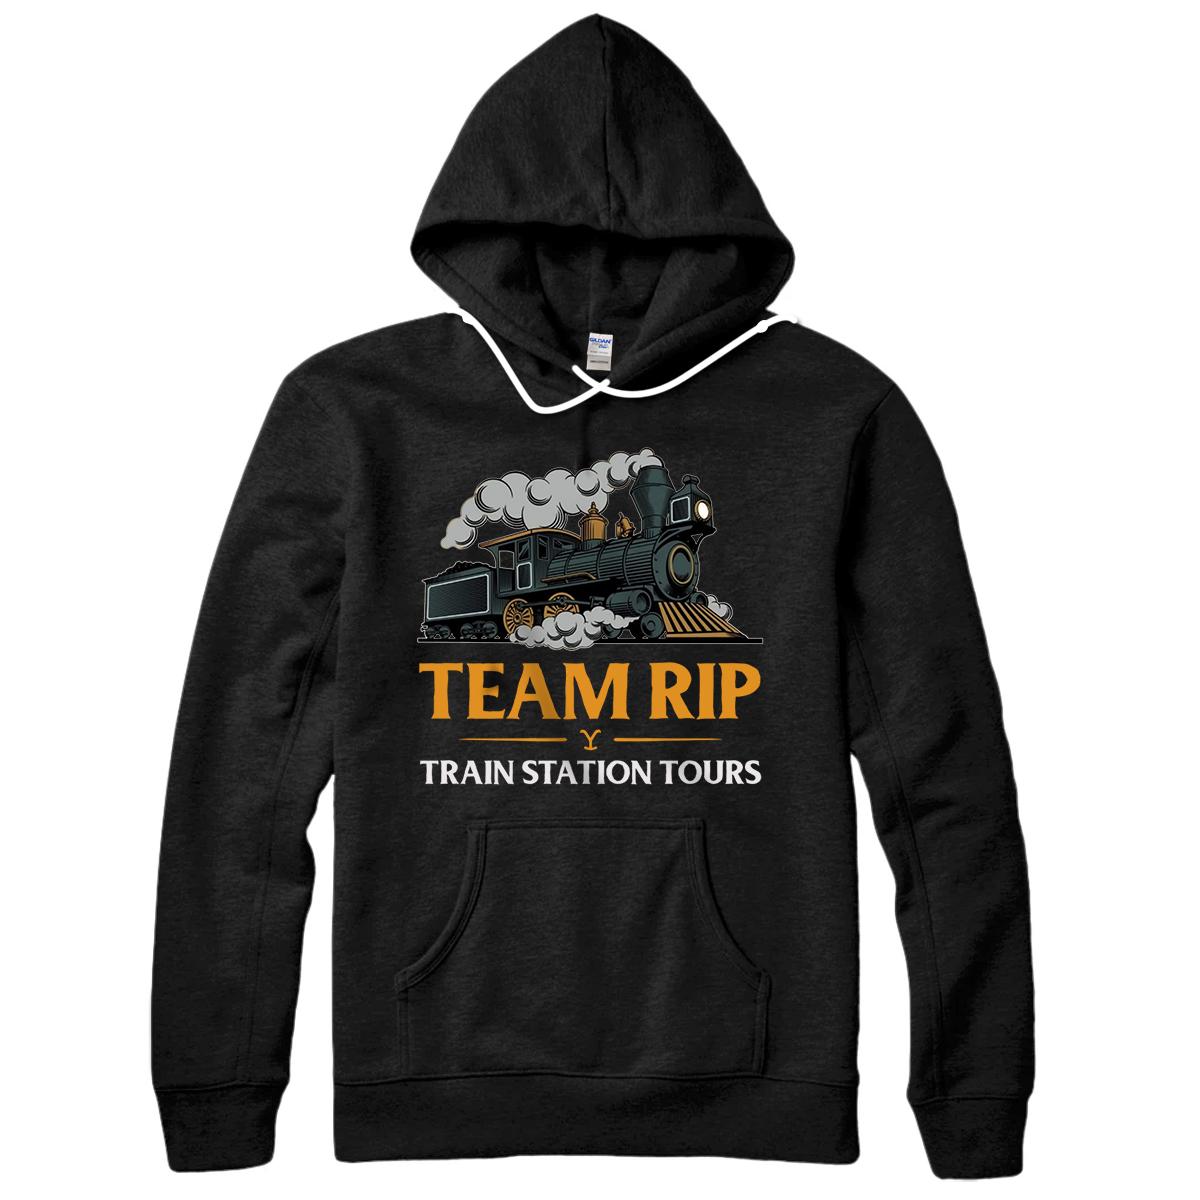 Personalized Team-Rip Train Station Tours Yellowstone Pullover Hoodie